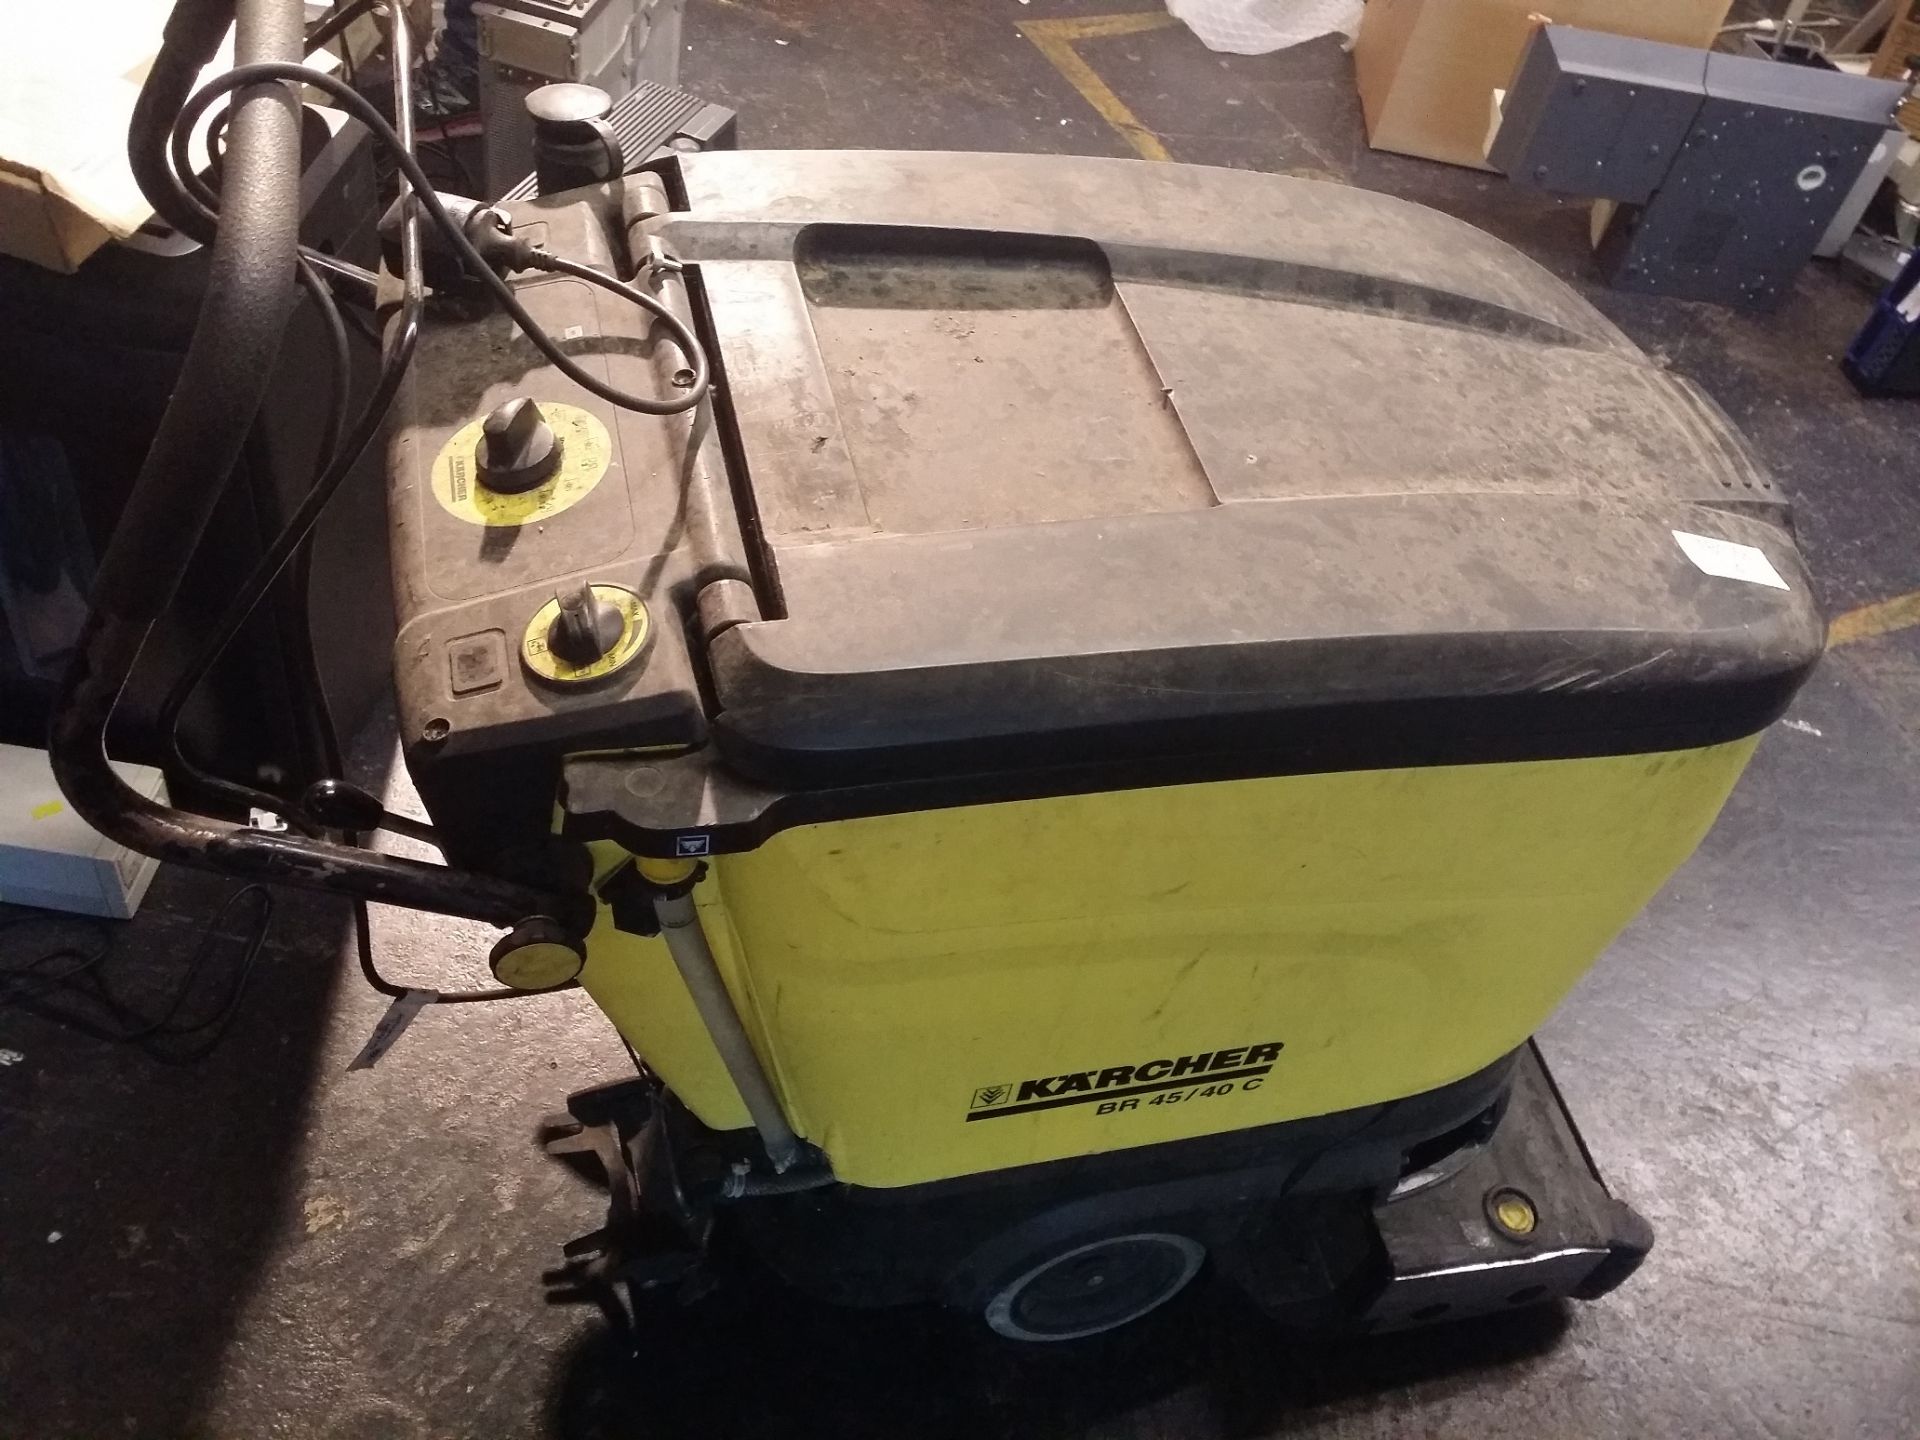 KARCHER BR 45/40C Scrubber - Not Powering On